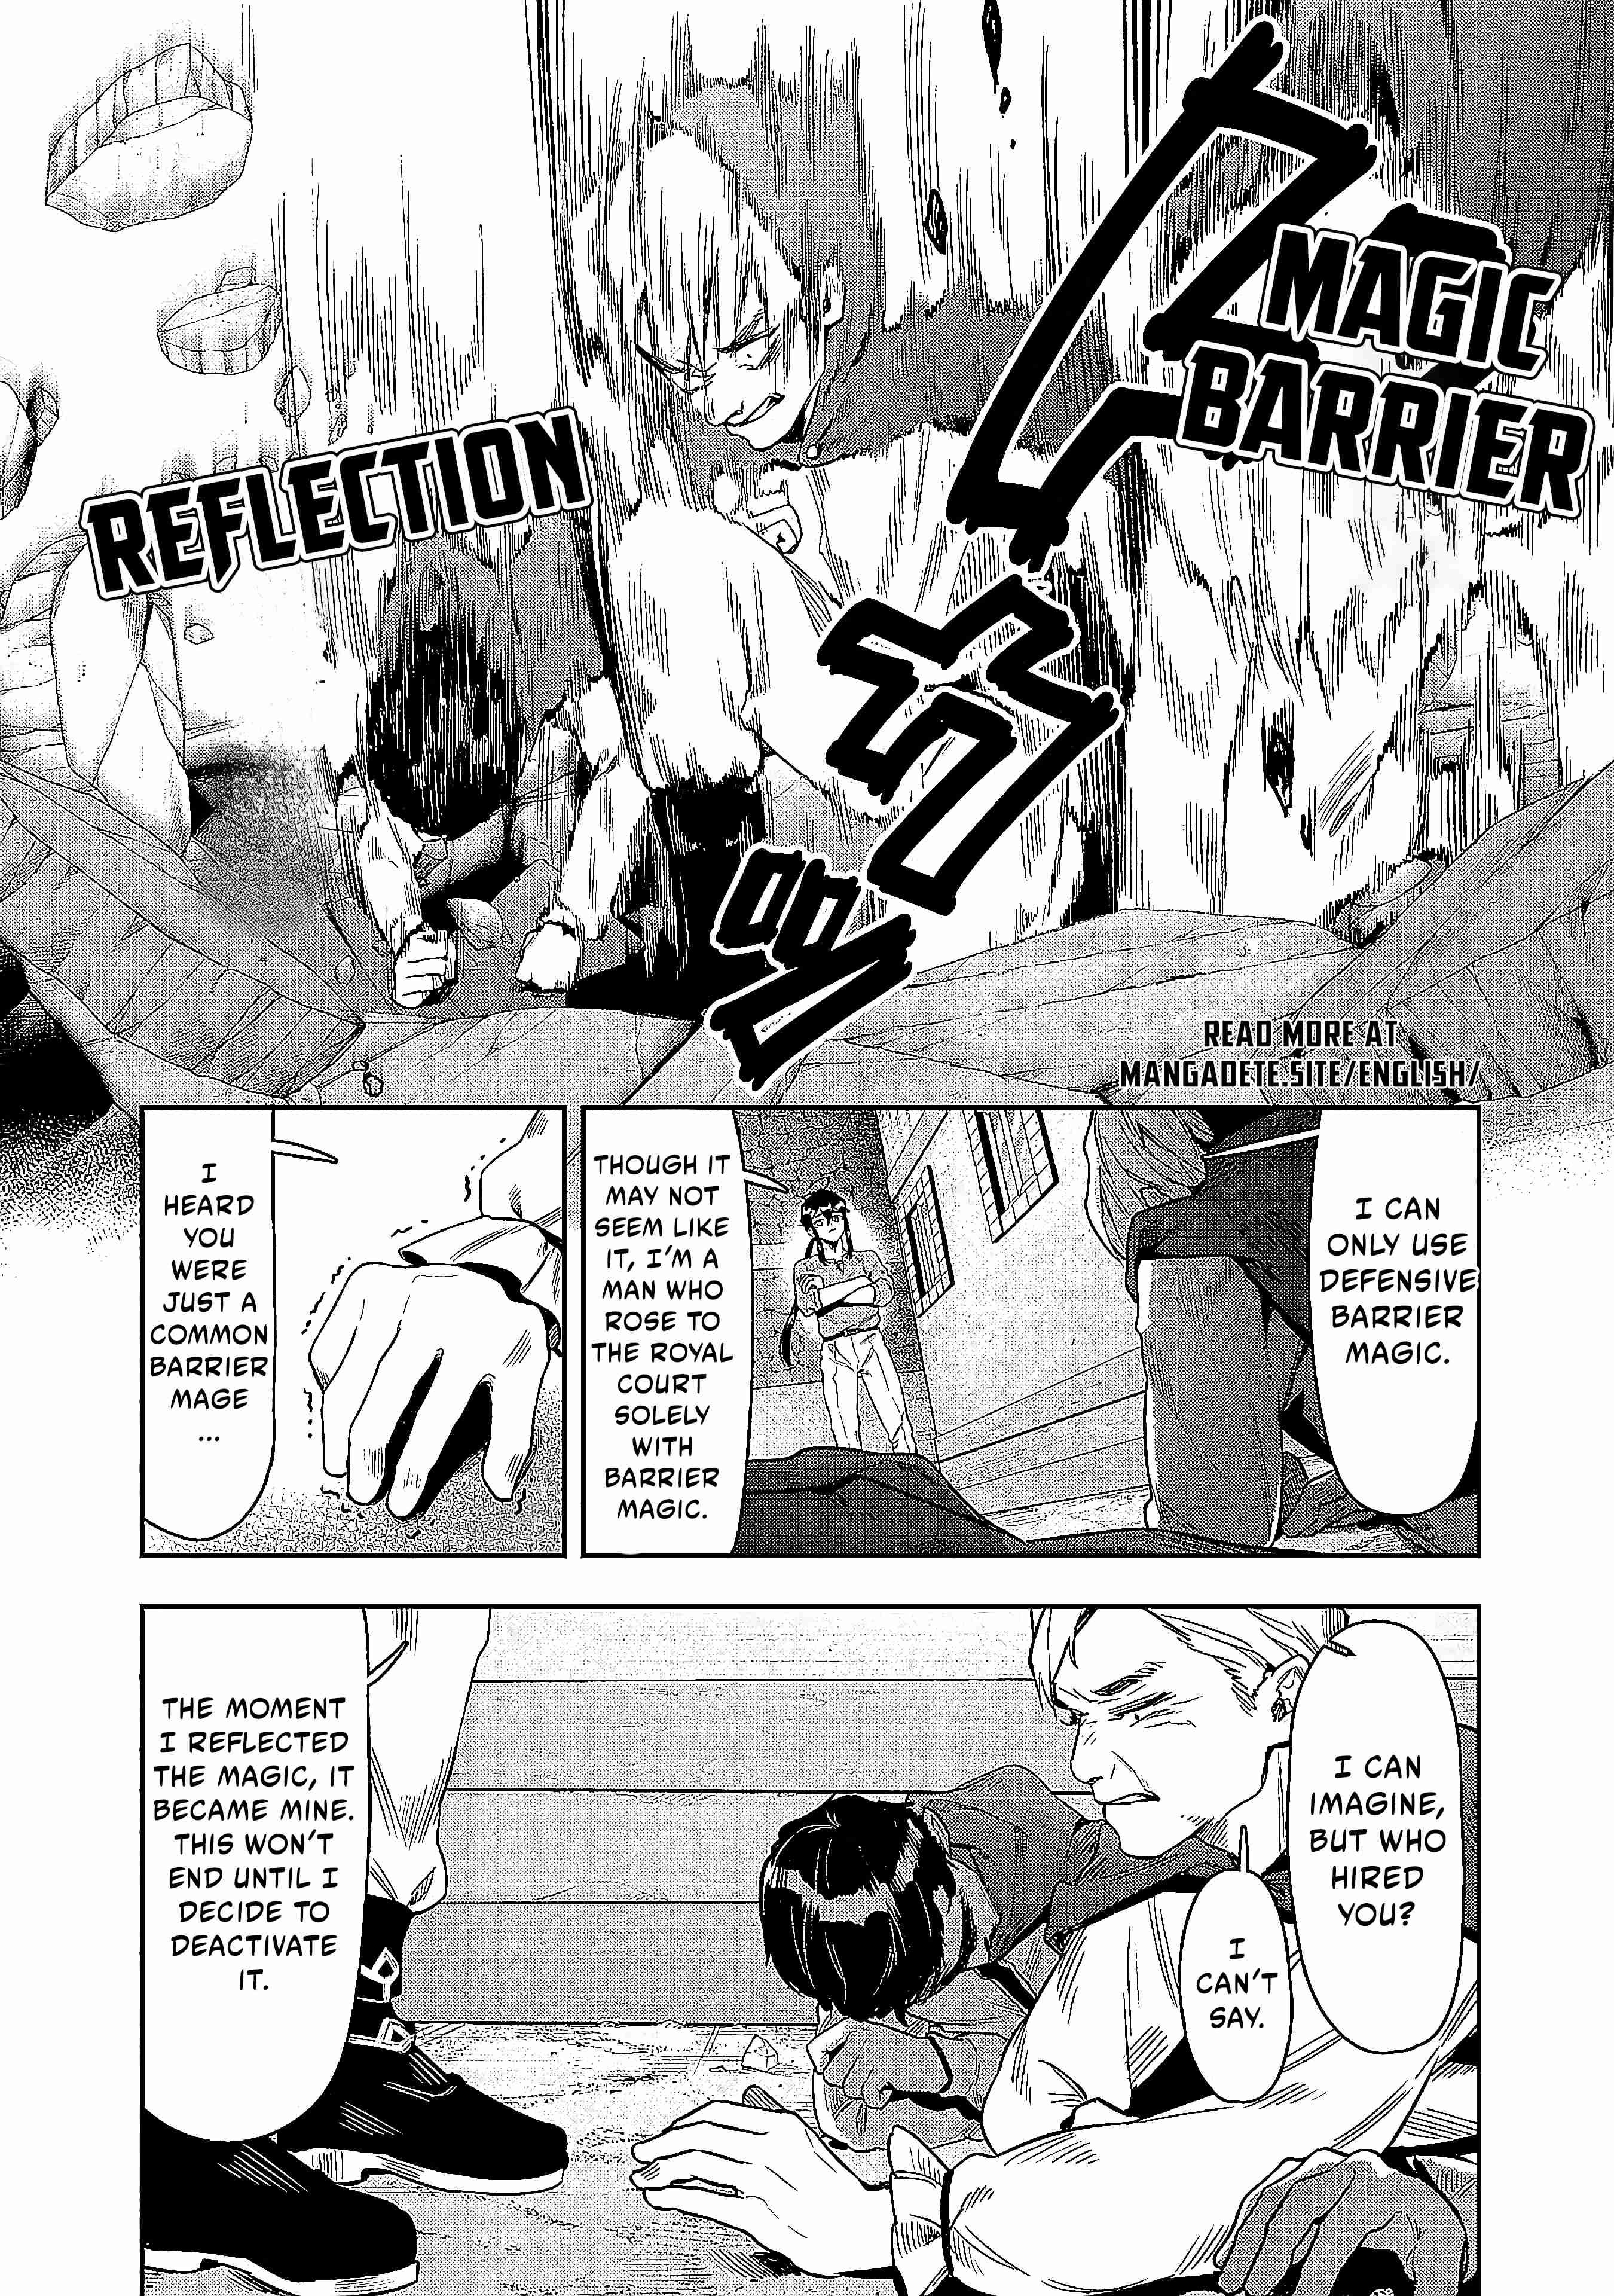 When I Put Up The Strongest Barrier In The Country, It Became Too Peaceful And I Was Banished. They Did Know That That Barrier Isn't Permanent, Right? - 1 page 30-c9b5a3a4